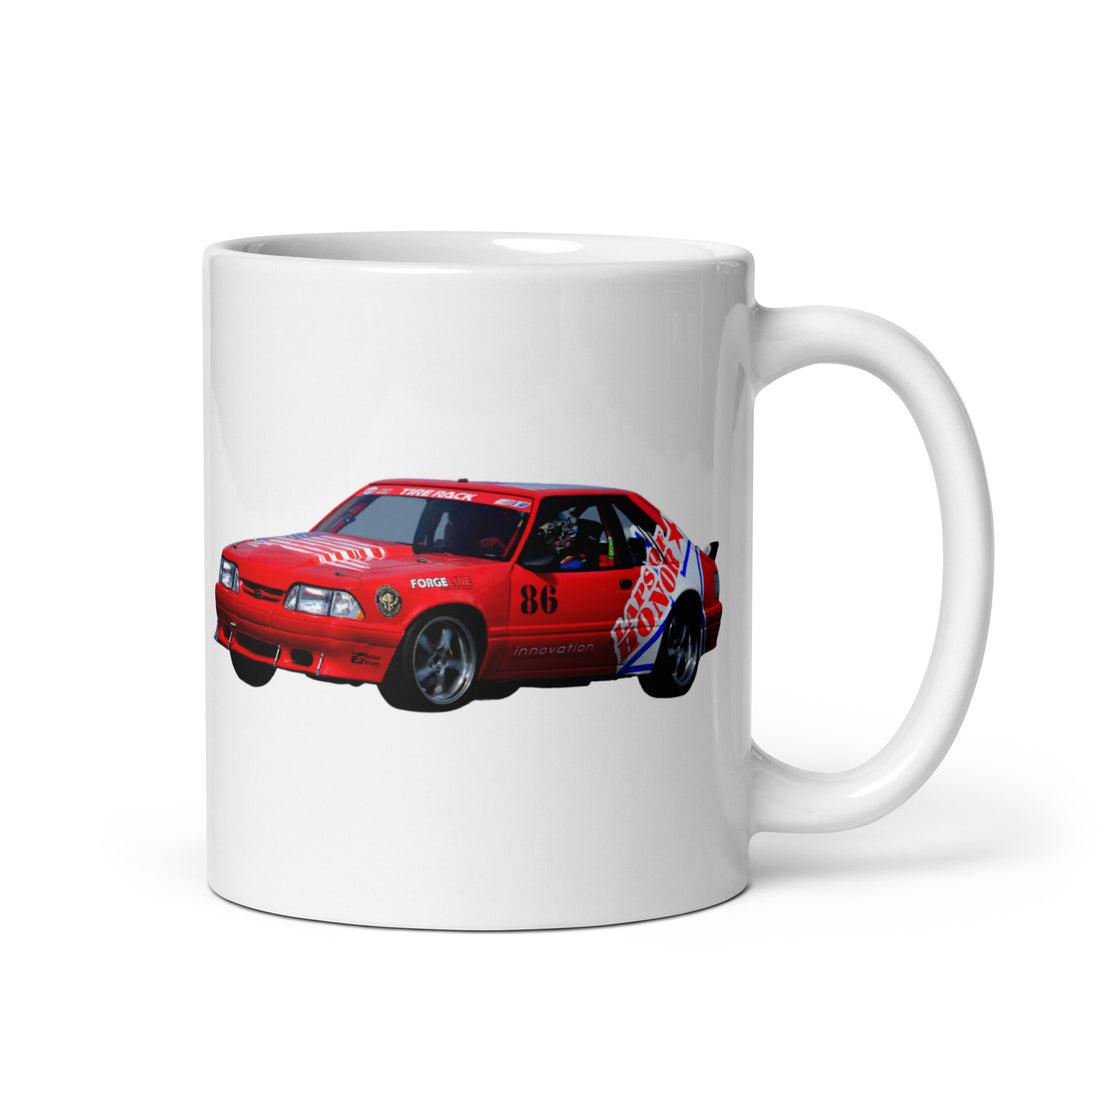 Eco Fox Mustang Coffee Mug - Fueling Homes, Not Just Races!